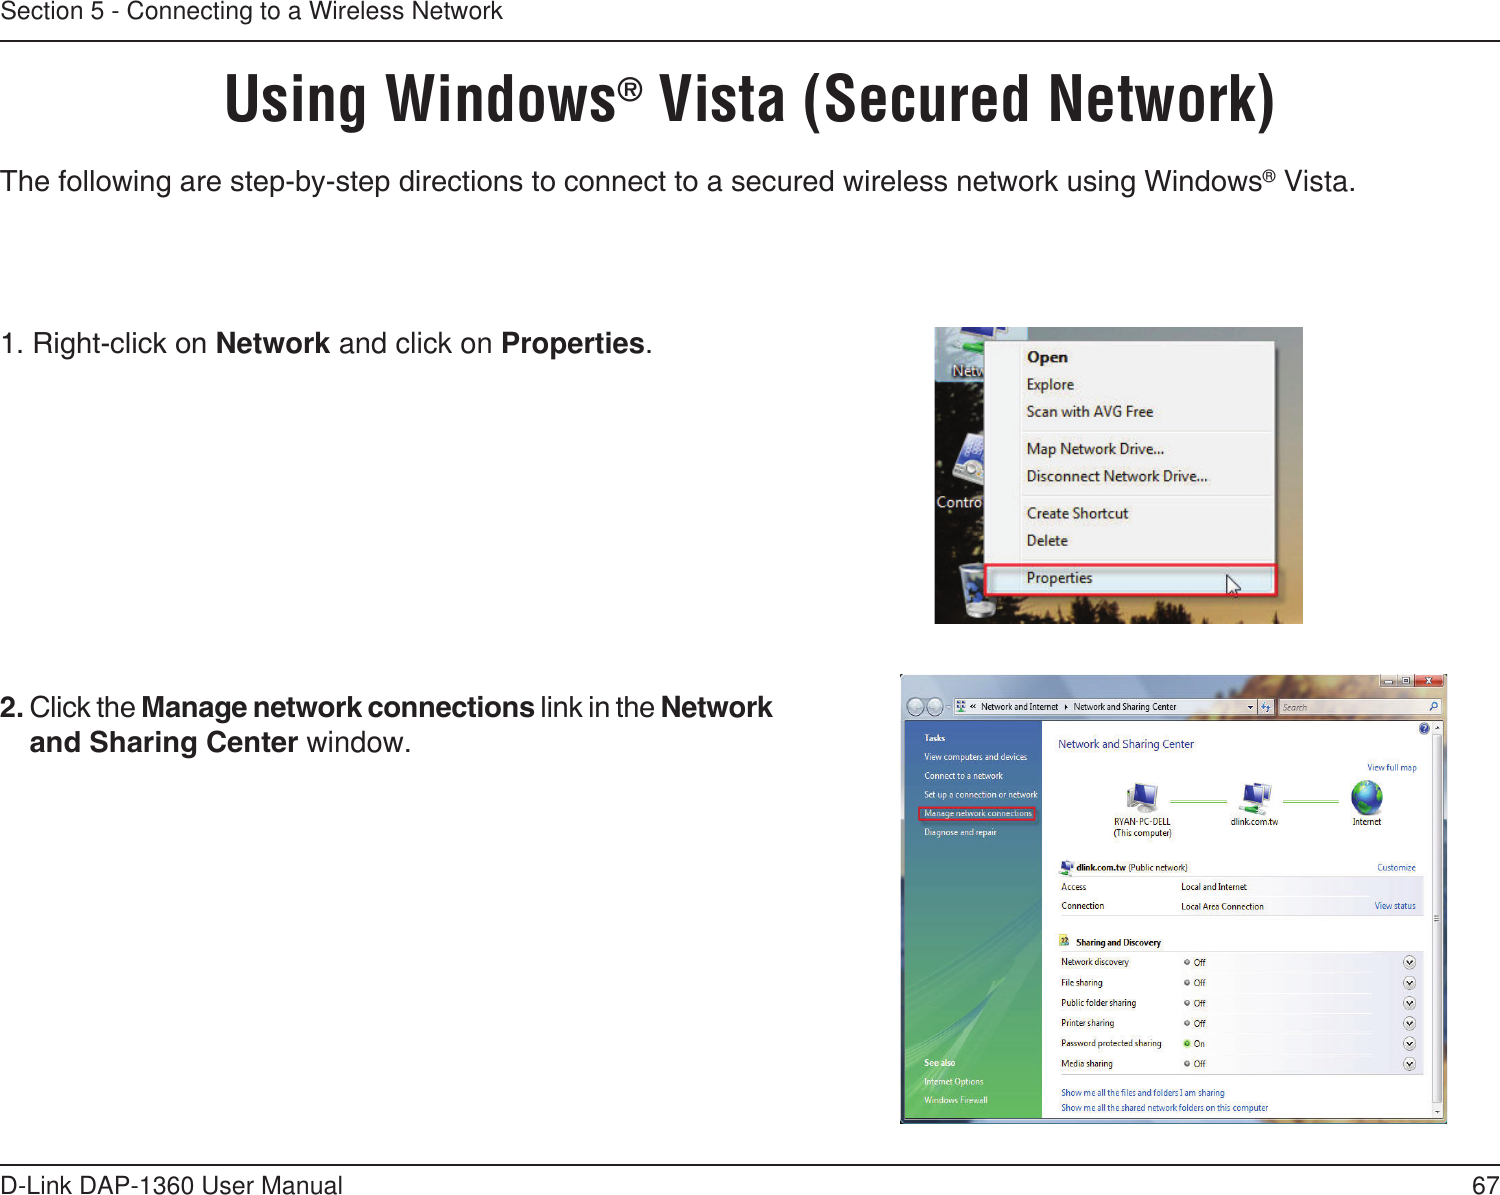 67D-Link DAP-1360 User ManualSection 5 - Connecting to a Wireless NetworkUsing Windows® Vista (Secured Network)The following are step-by-step directions to connect to a secured wireless network using Windows® Vista.2. Click the Manage network connections link in the Network and Sharing Center window. 1. Right-click on Network and click on Properties.     